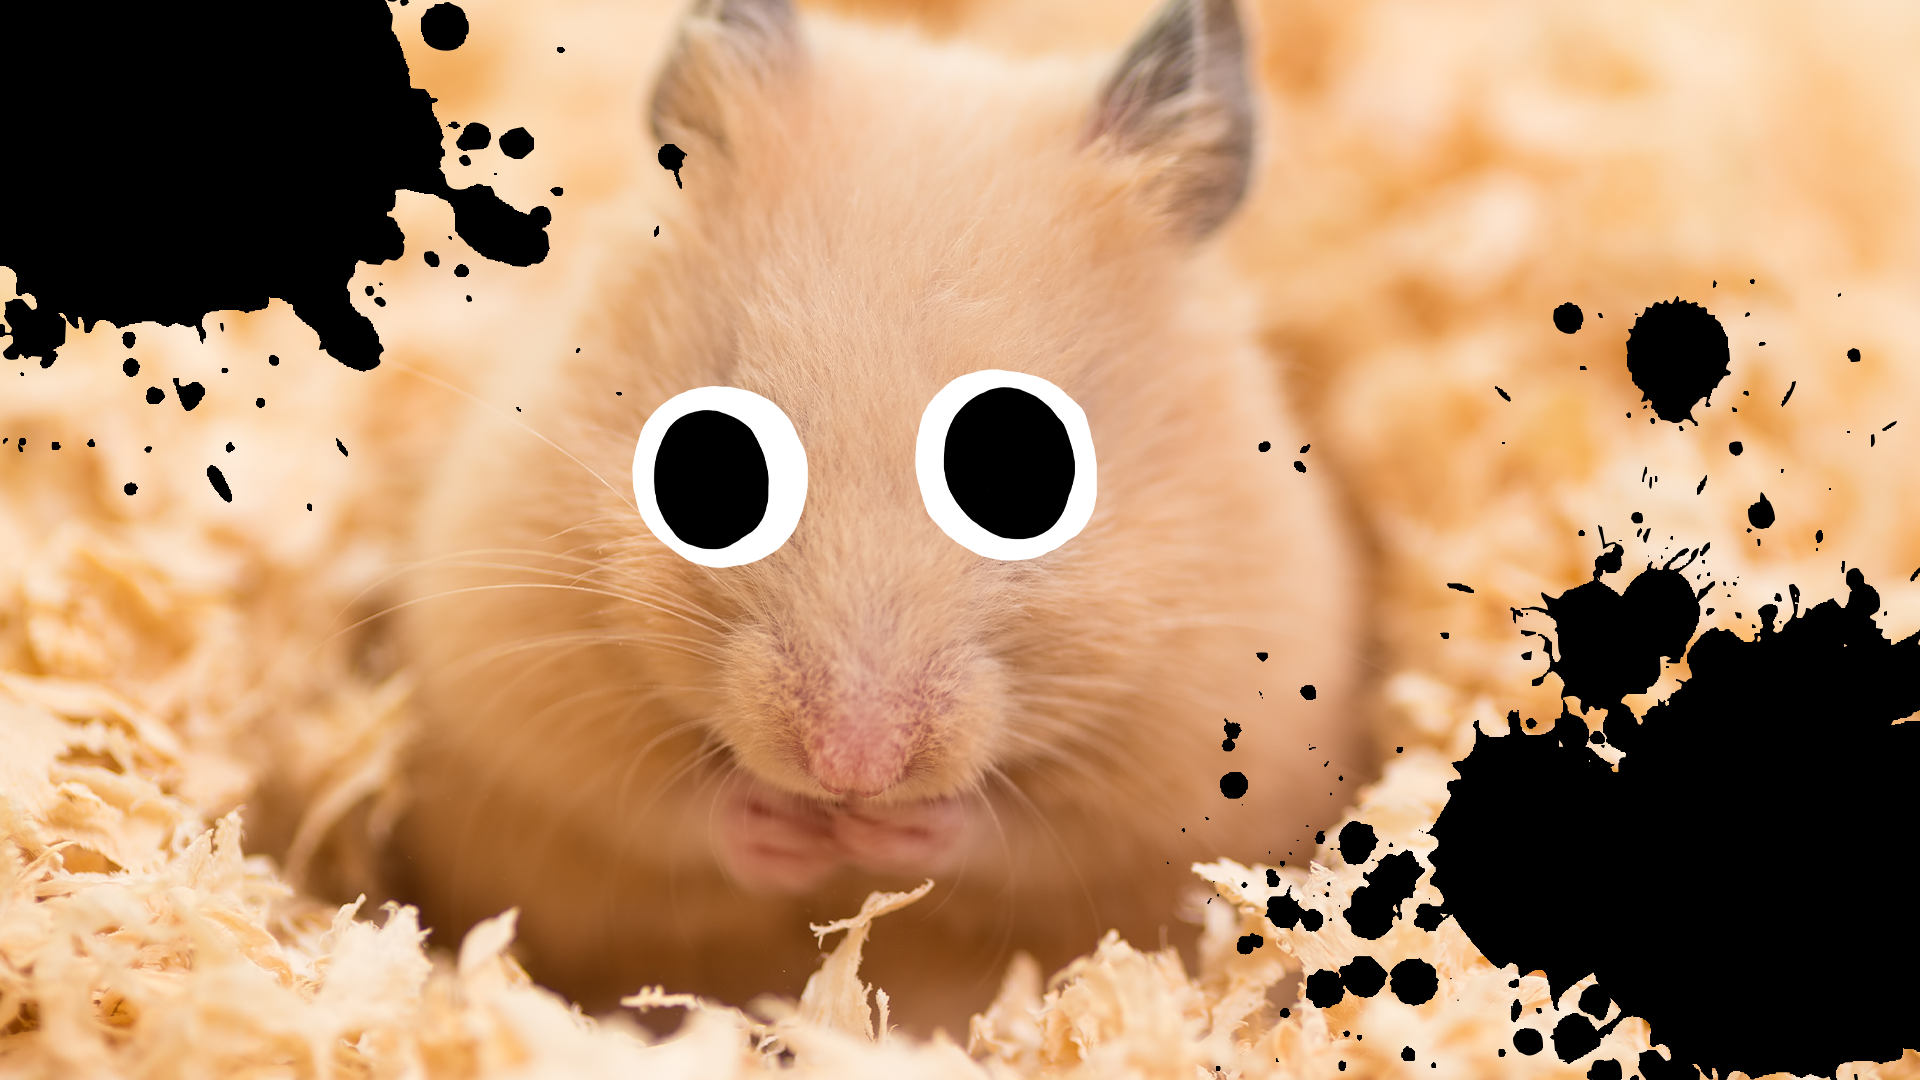 Hamster and splats